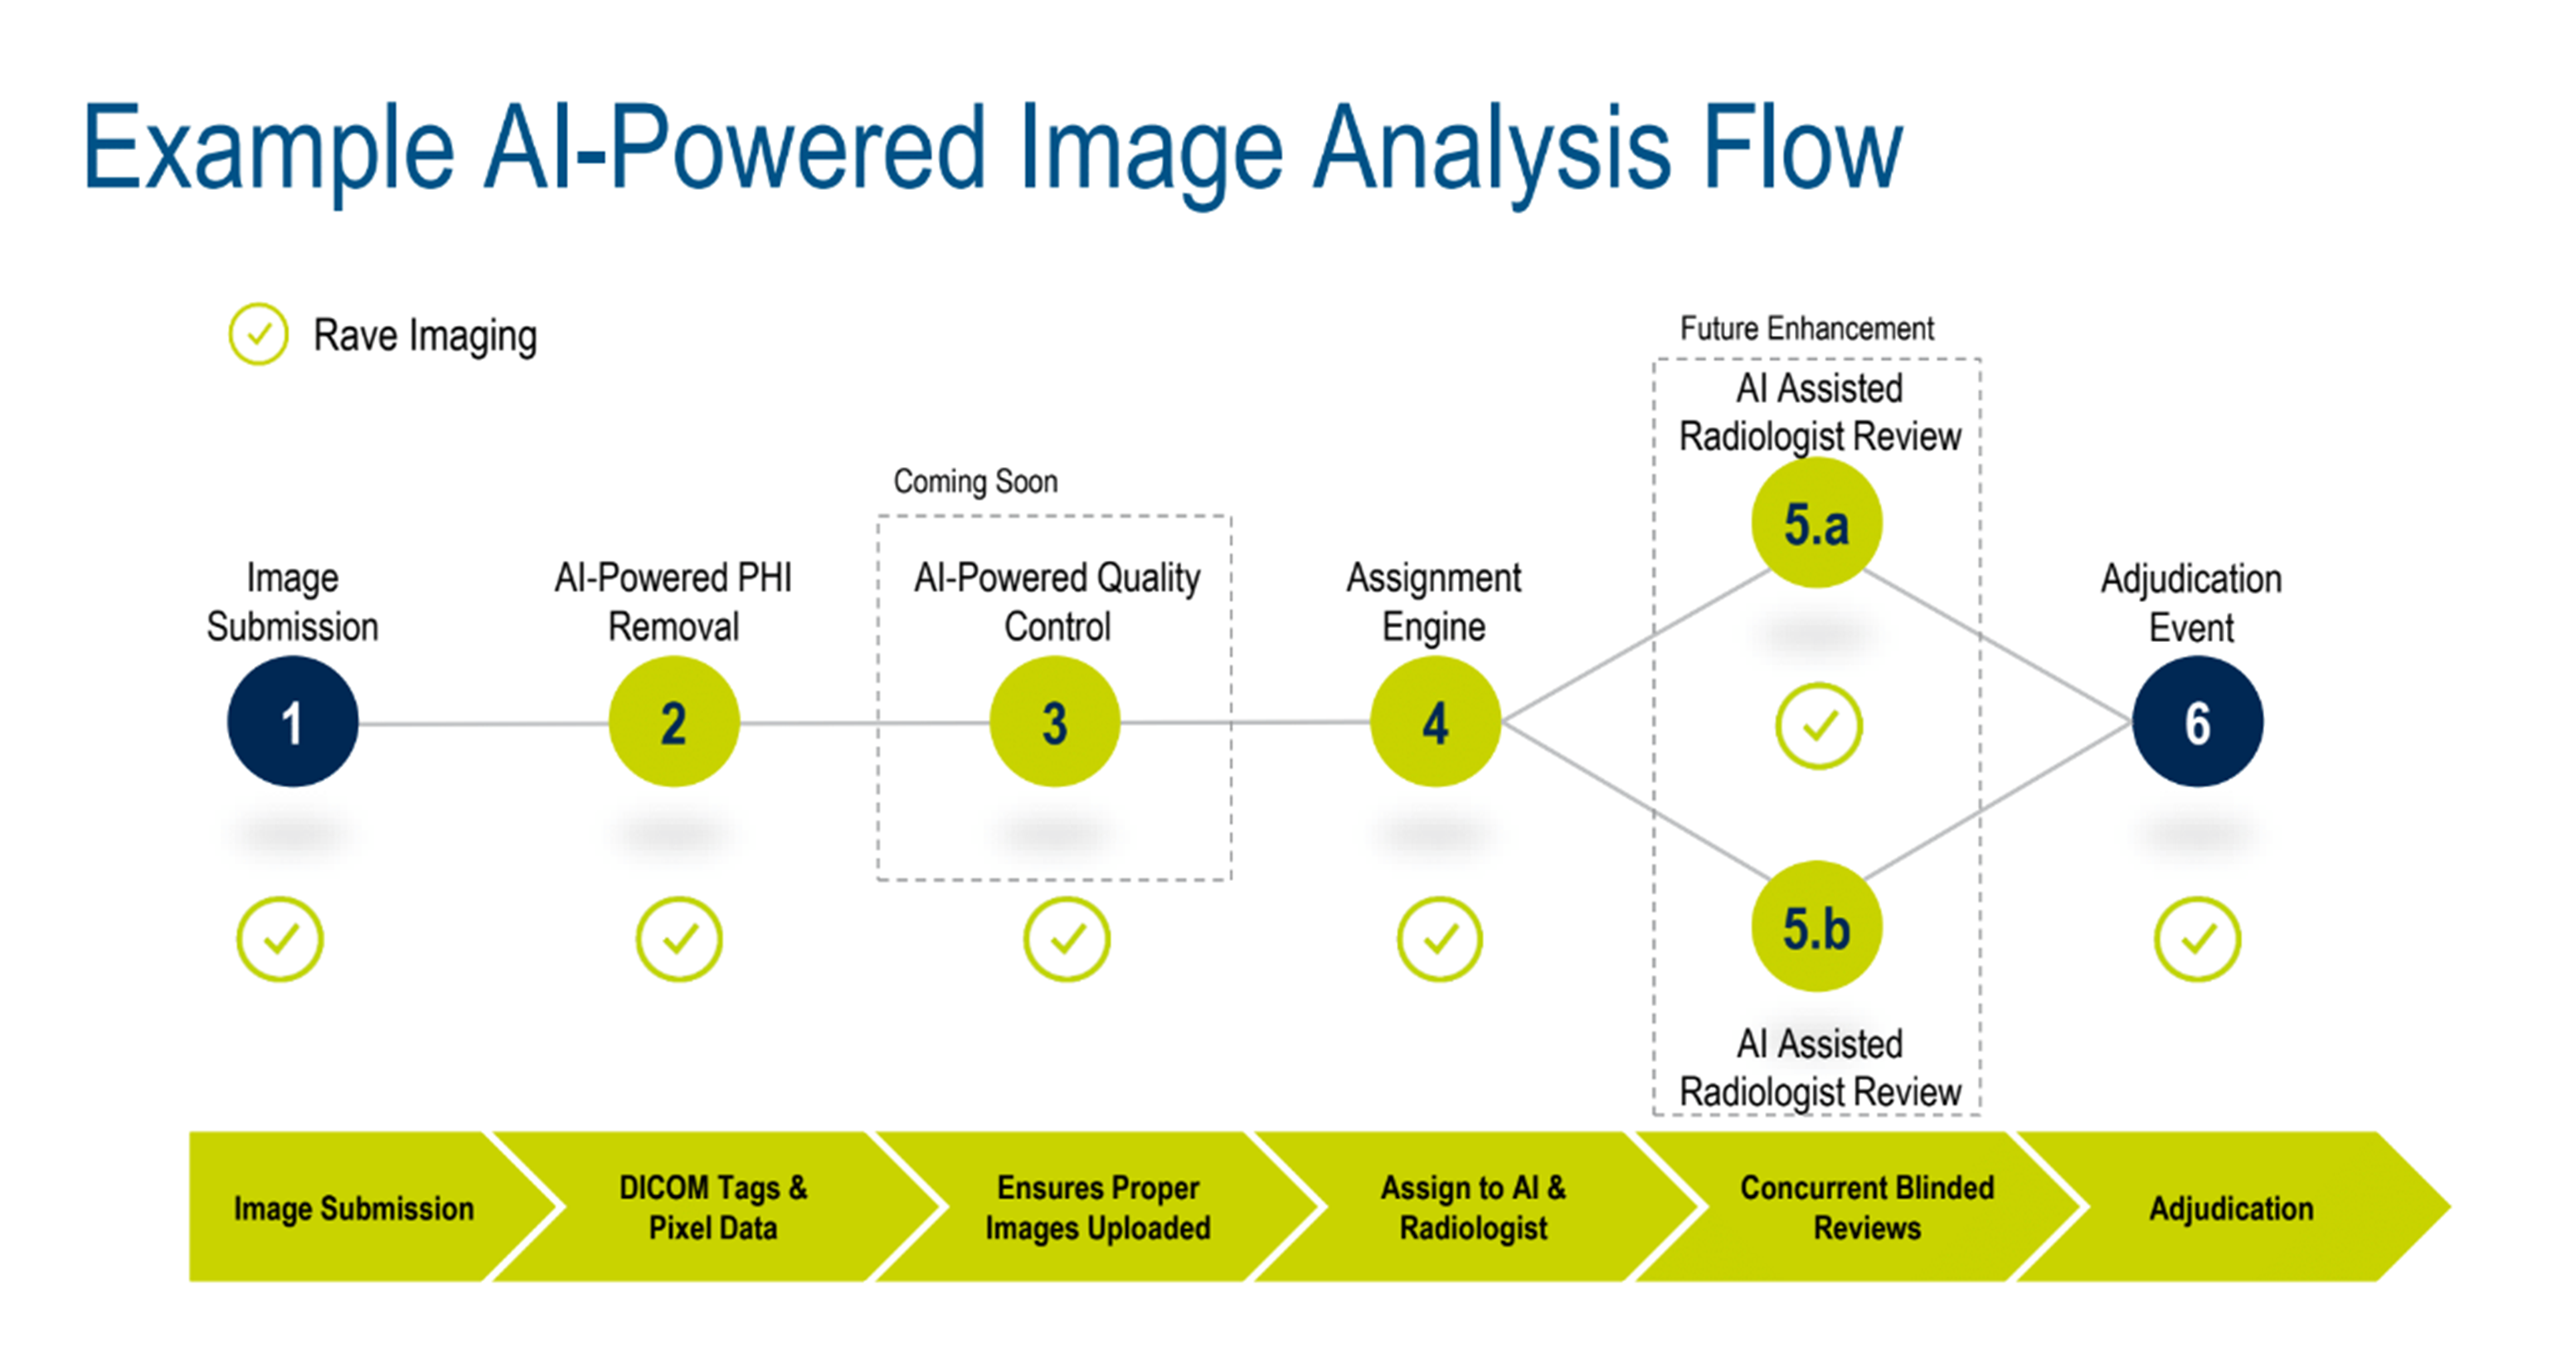 Example of an AI-powered image analysis flow.